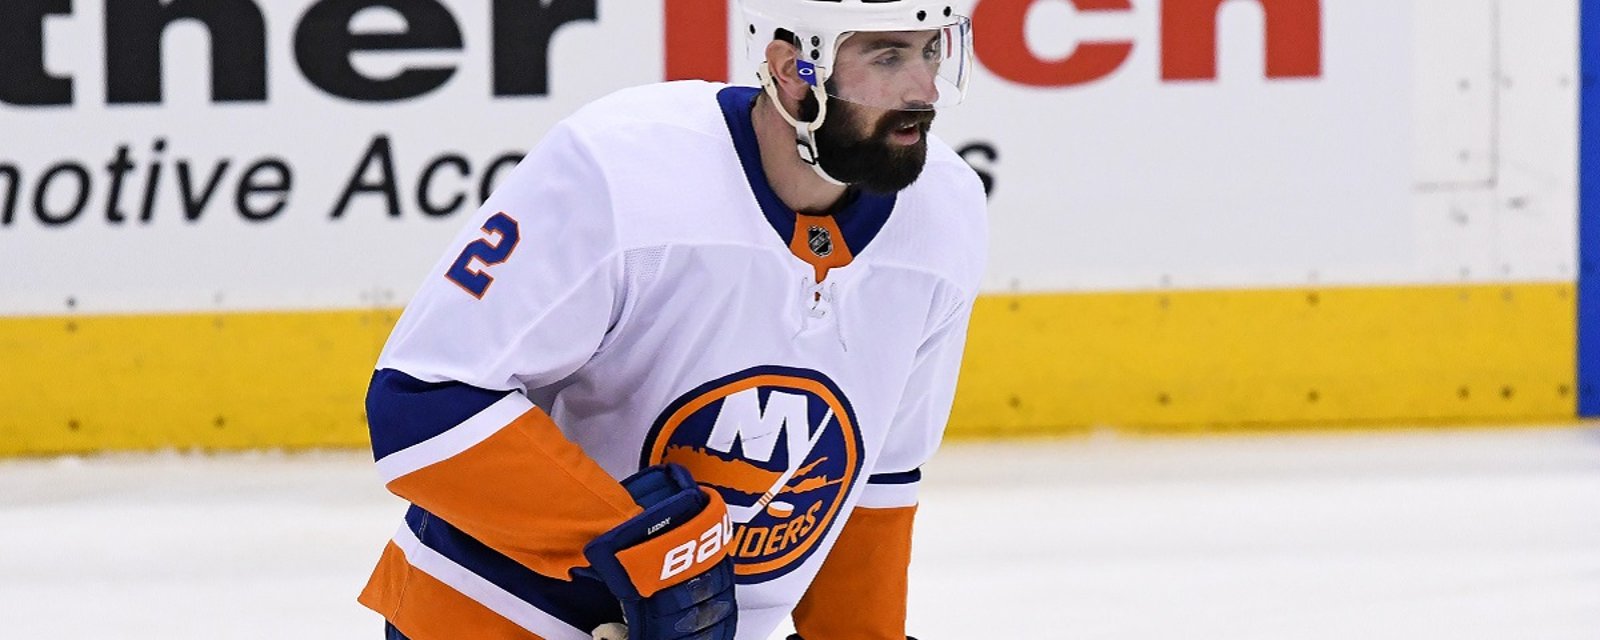 Nick Leddy comments on 2 game suspension to Connor McDavid.